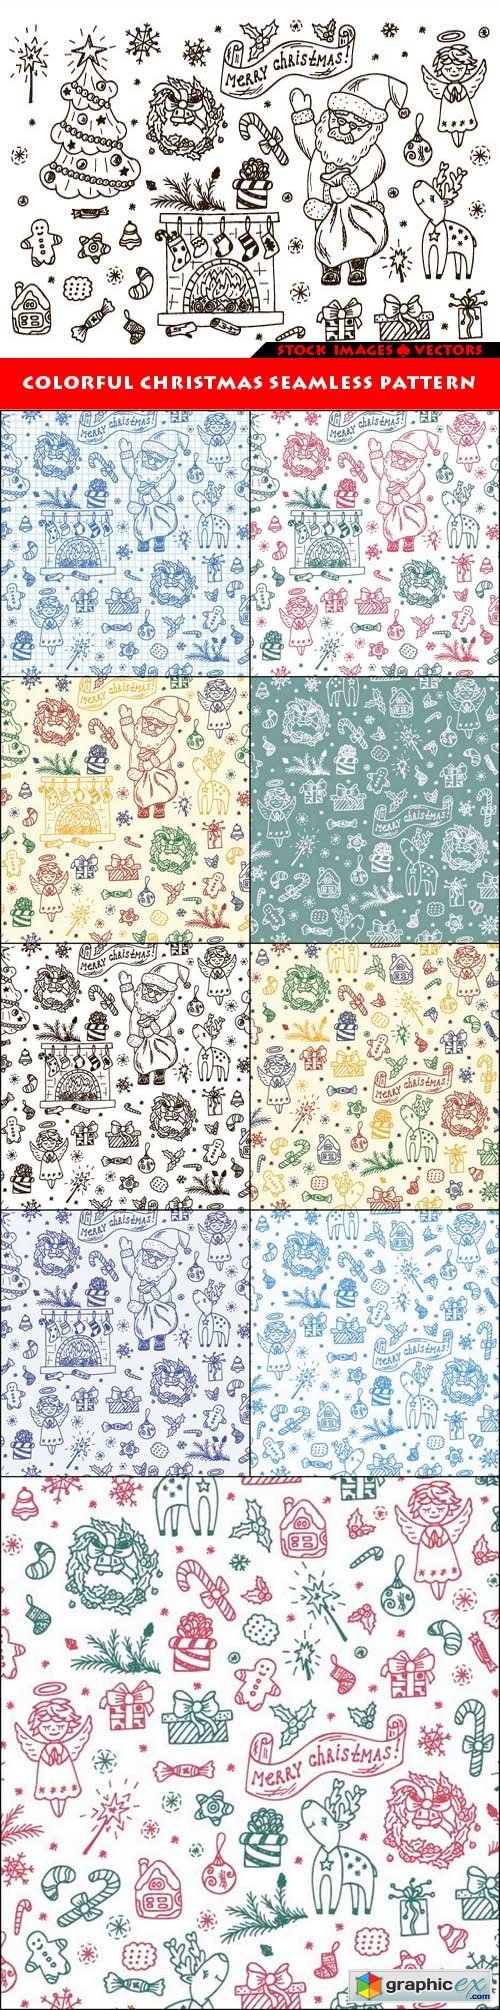 Colorful Christmas seamless pattern 10x EPS